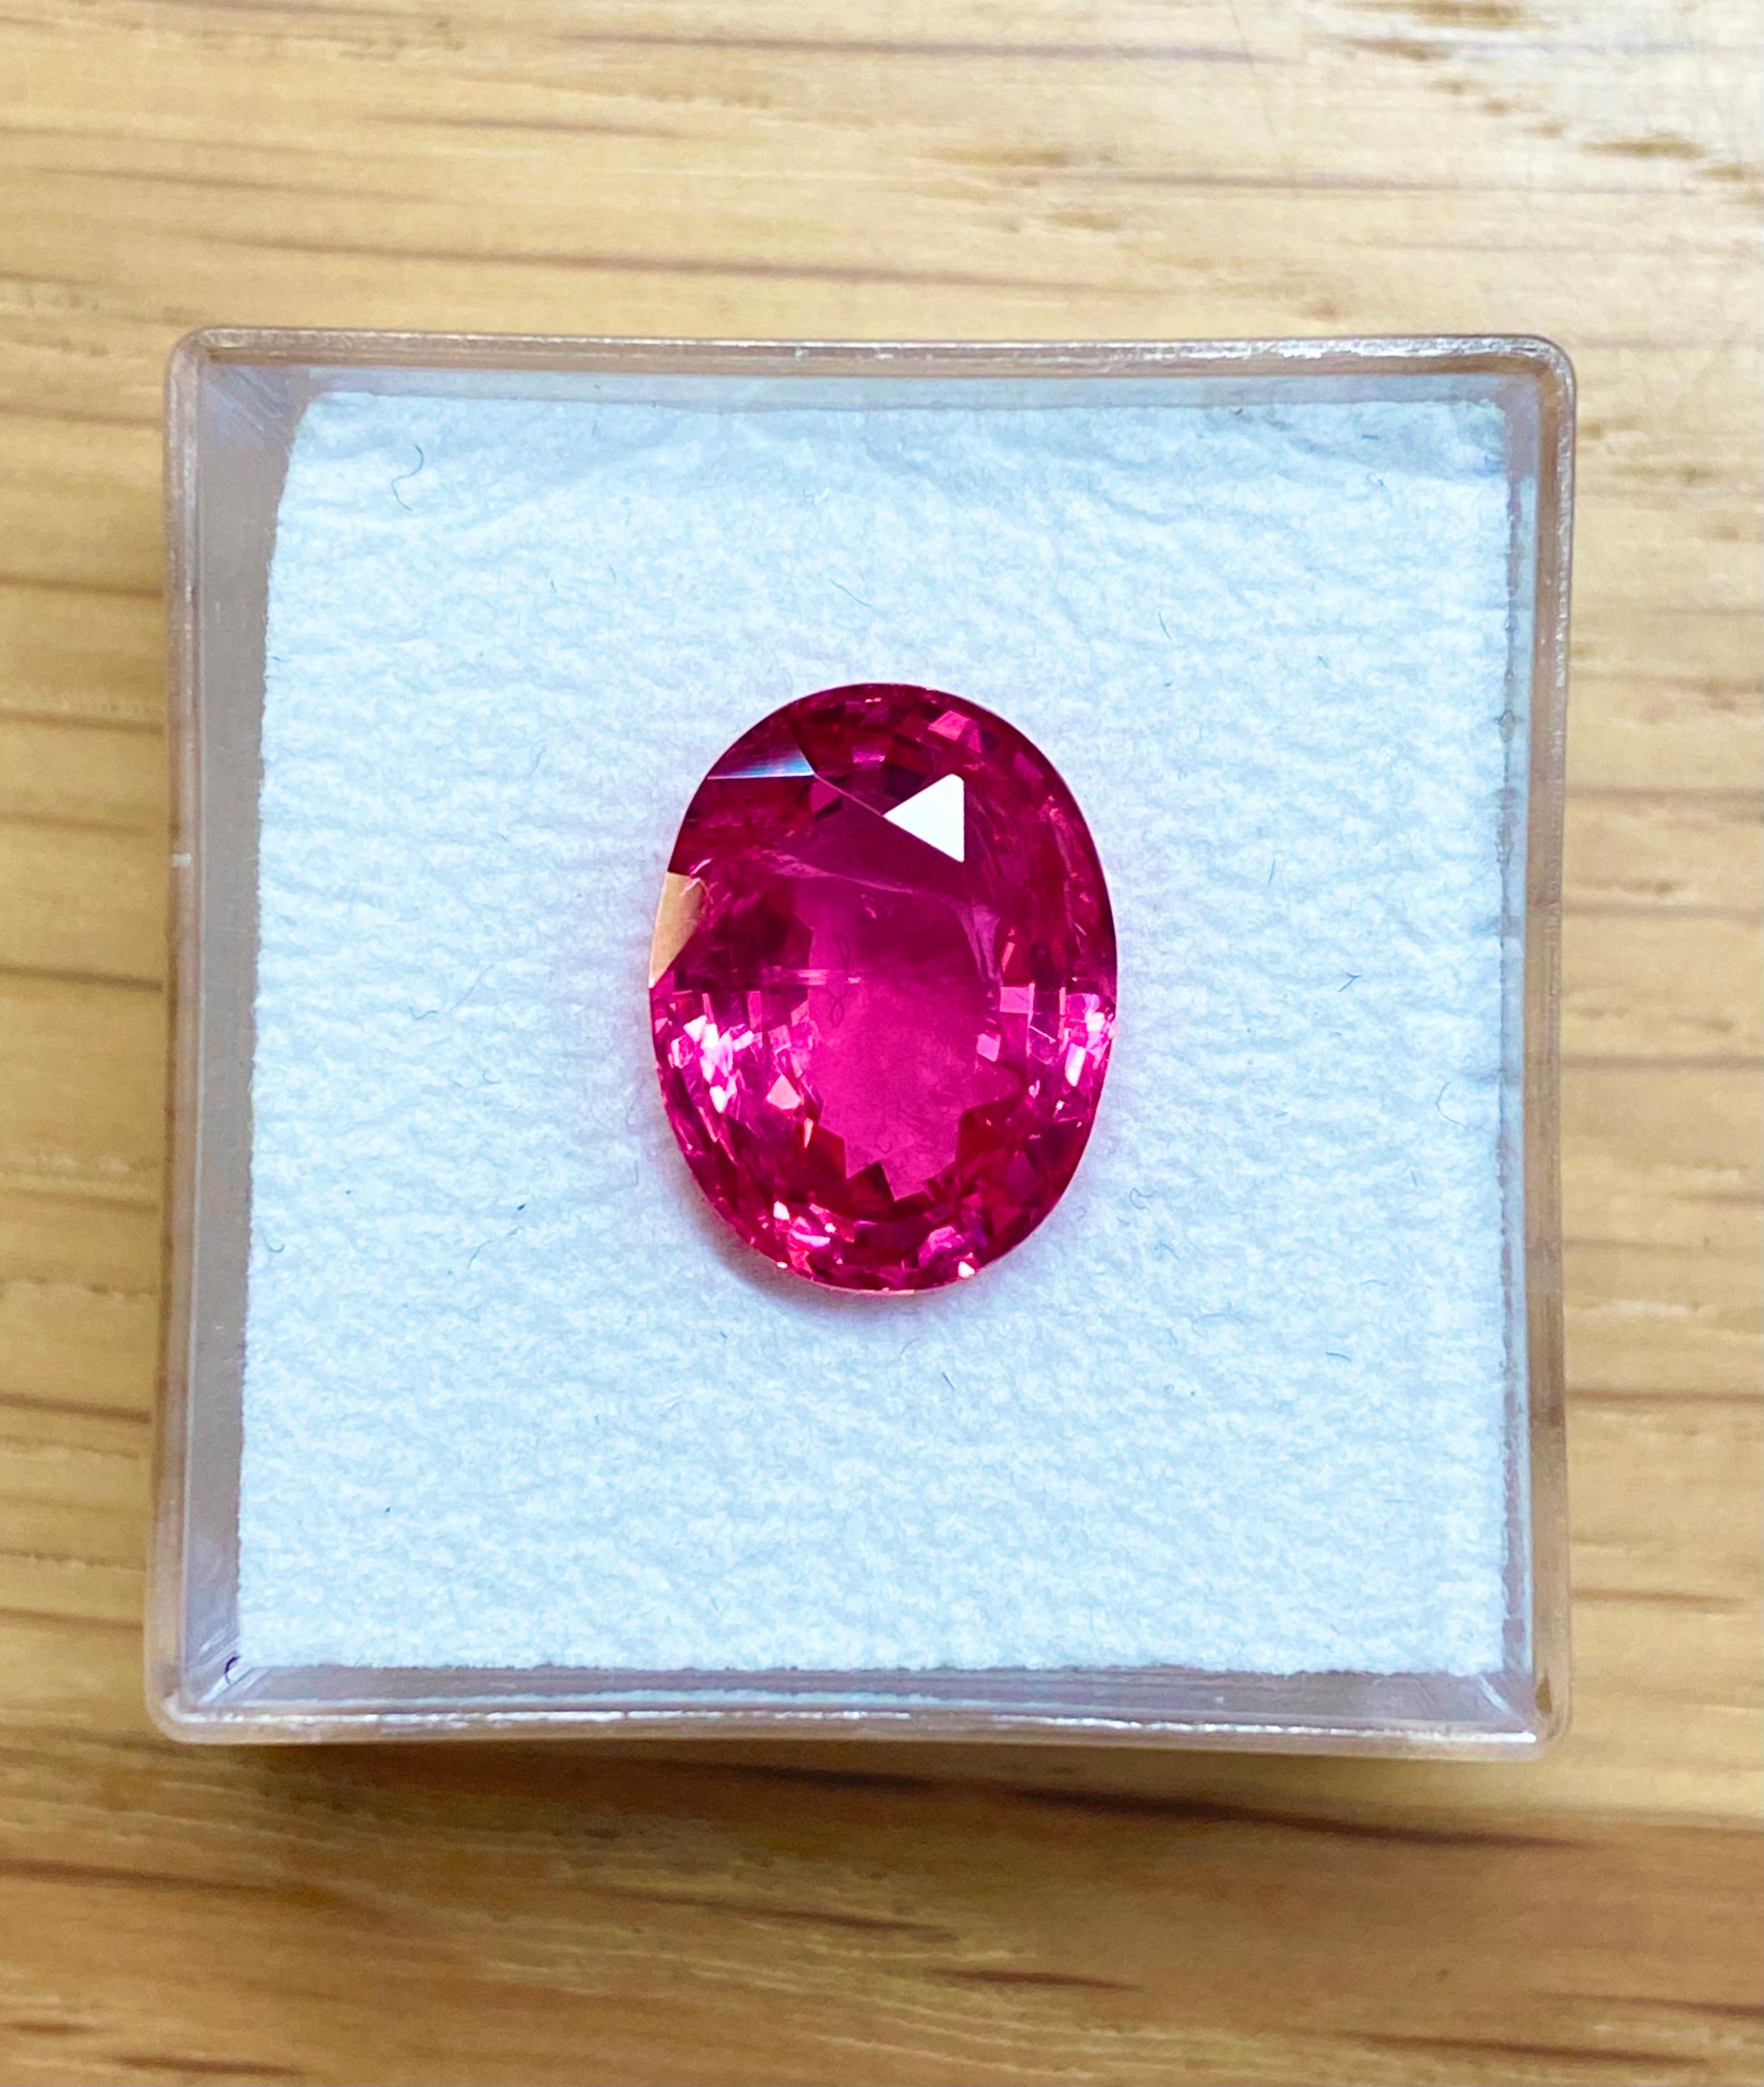 A bright pink spinel of 4.98ct. The measurements of this stone are 11.6x8.8x5.9mm. Our talented jewellers here in Geneva can transform this stone into a stunning piece of jewellery. Manufacturing usually takes 4-8 weeks depending on the complexity